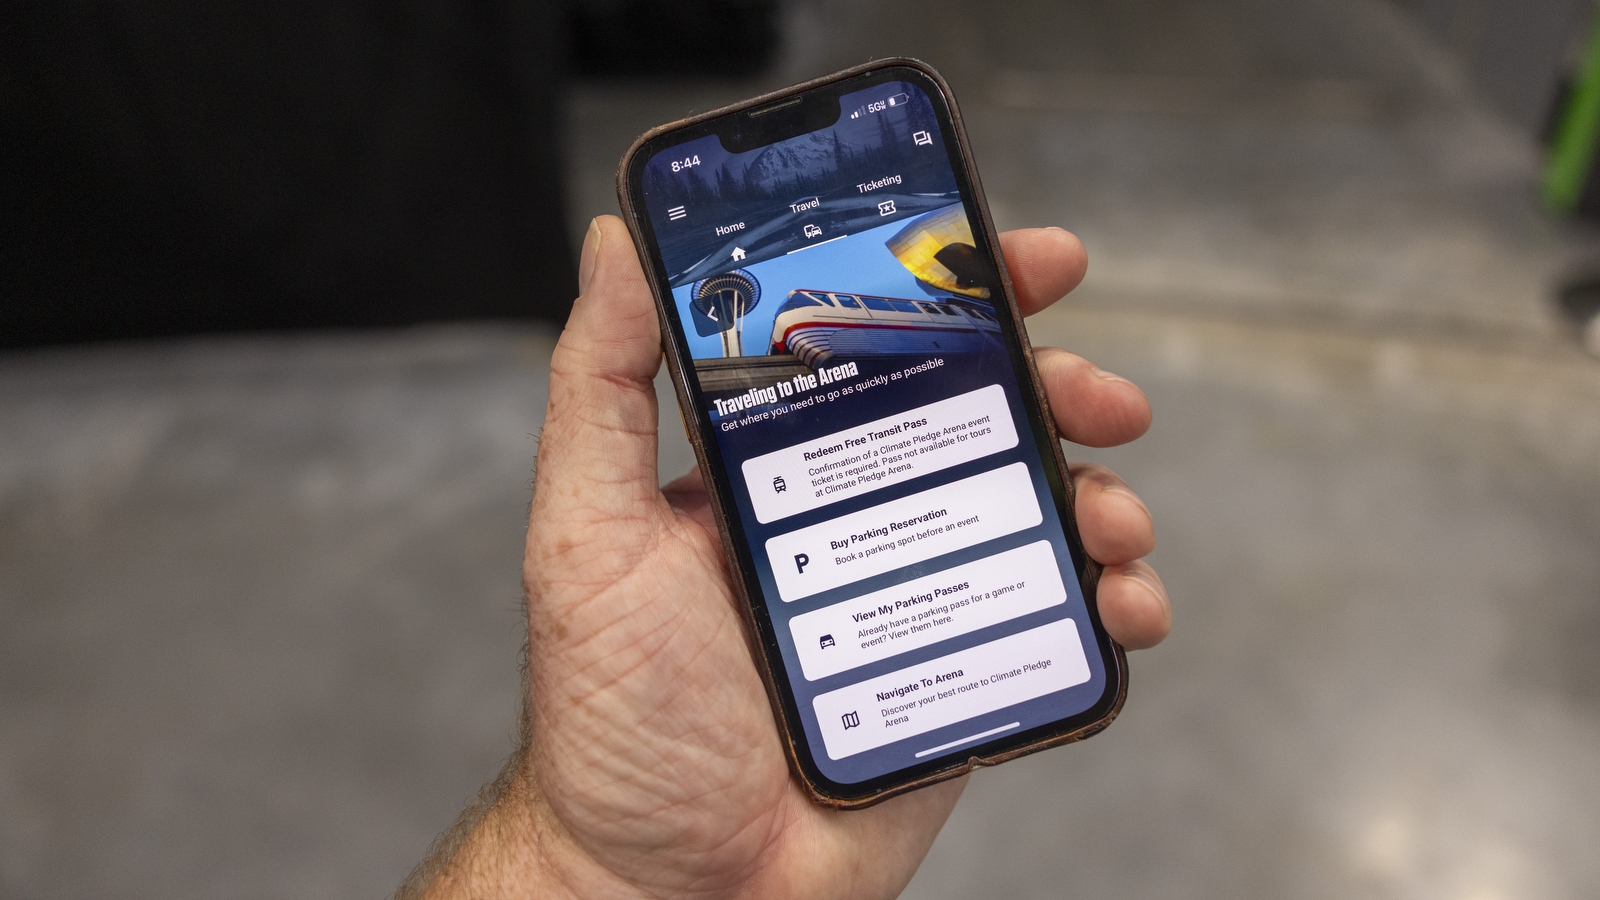 An image of the Seattle Kraken app. There is an image of the monorail along with buttons to select the mode of transportation you plan to take to the arena.